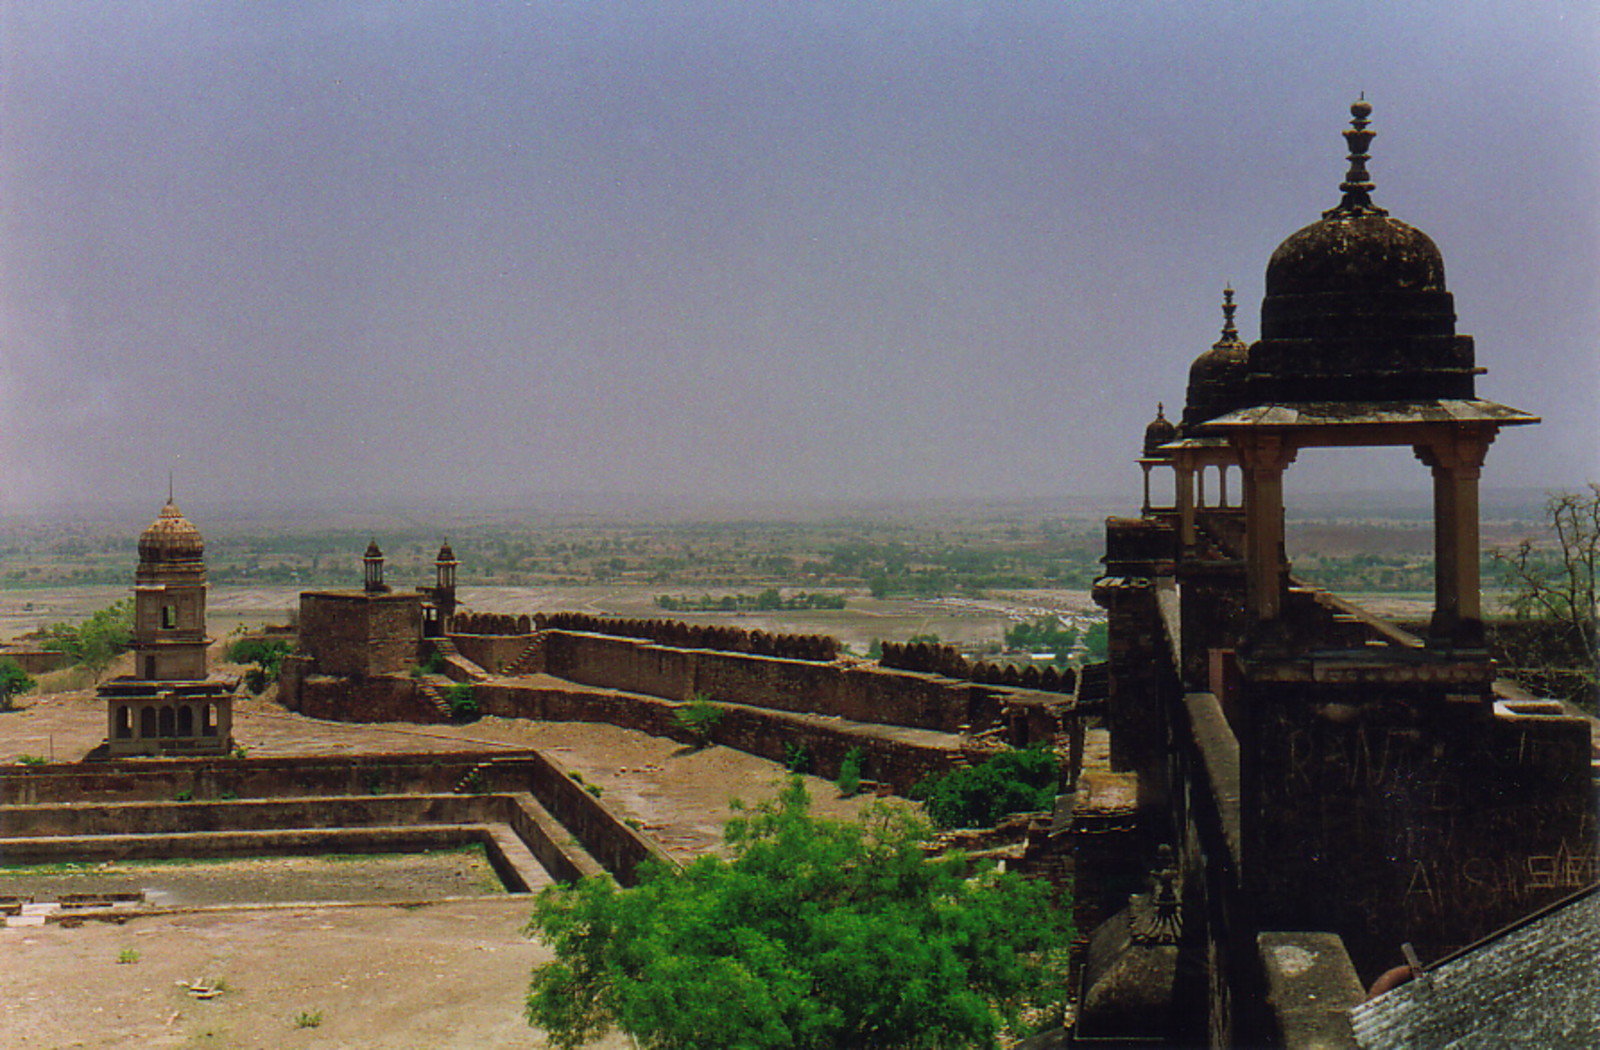 Pavilions on top of the northern end of Gwalior Fort